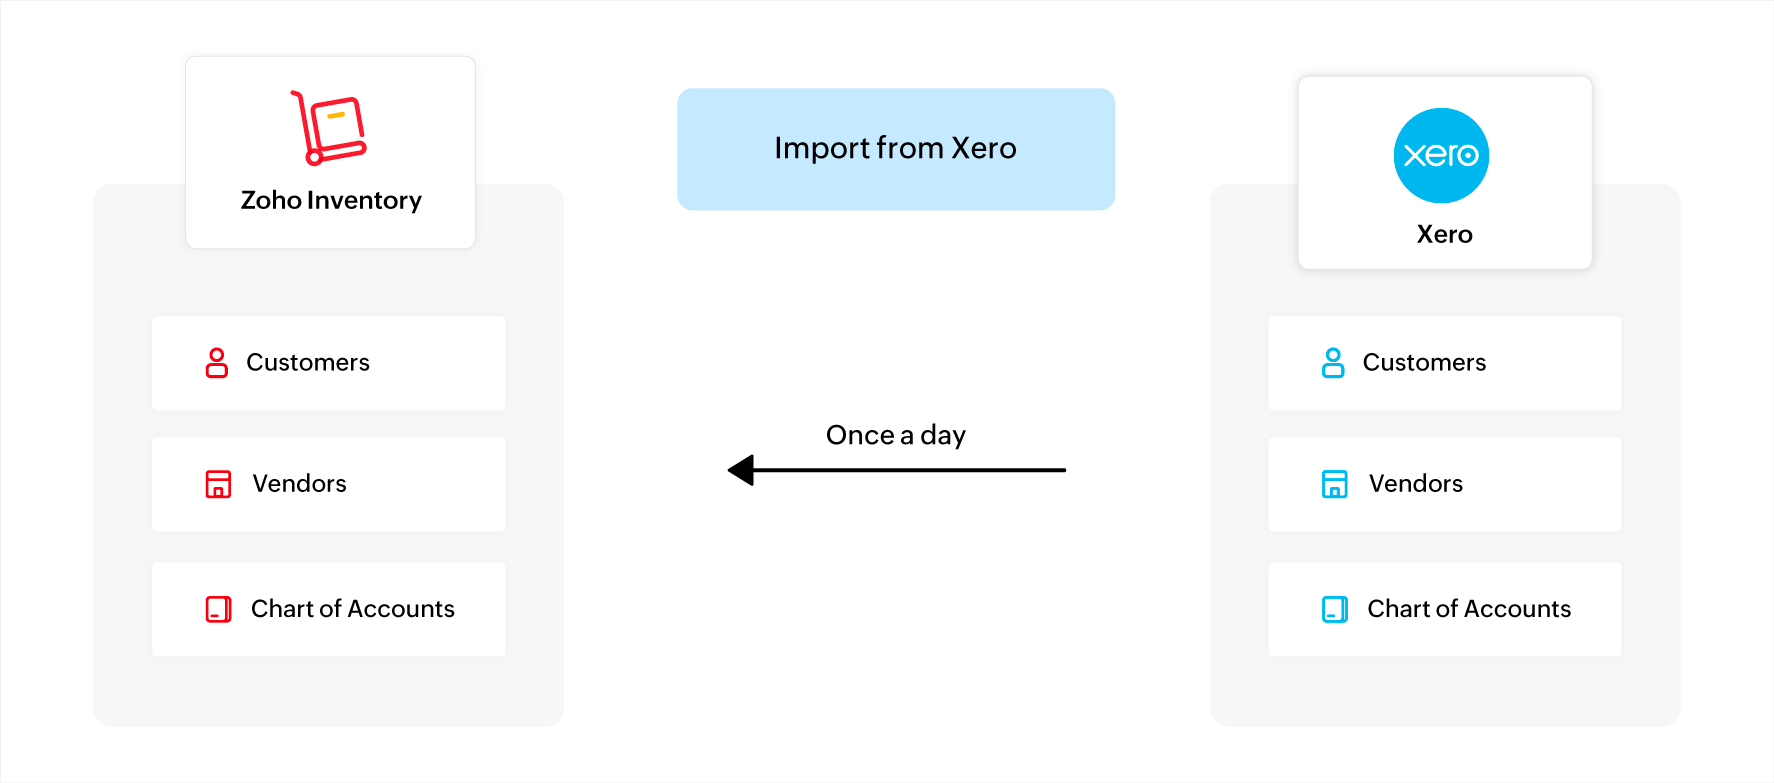 Importing transactions from Xero